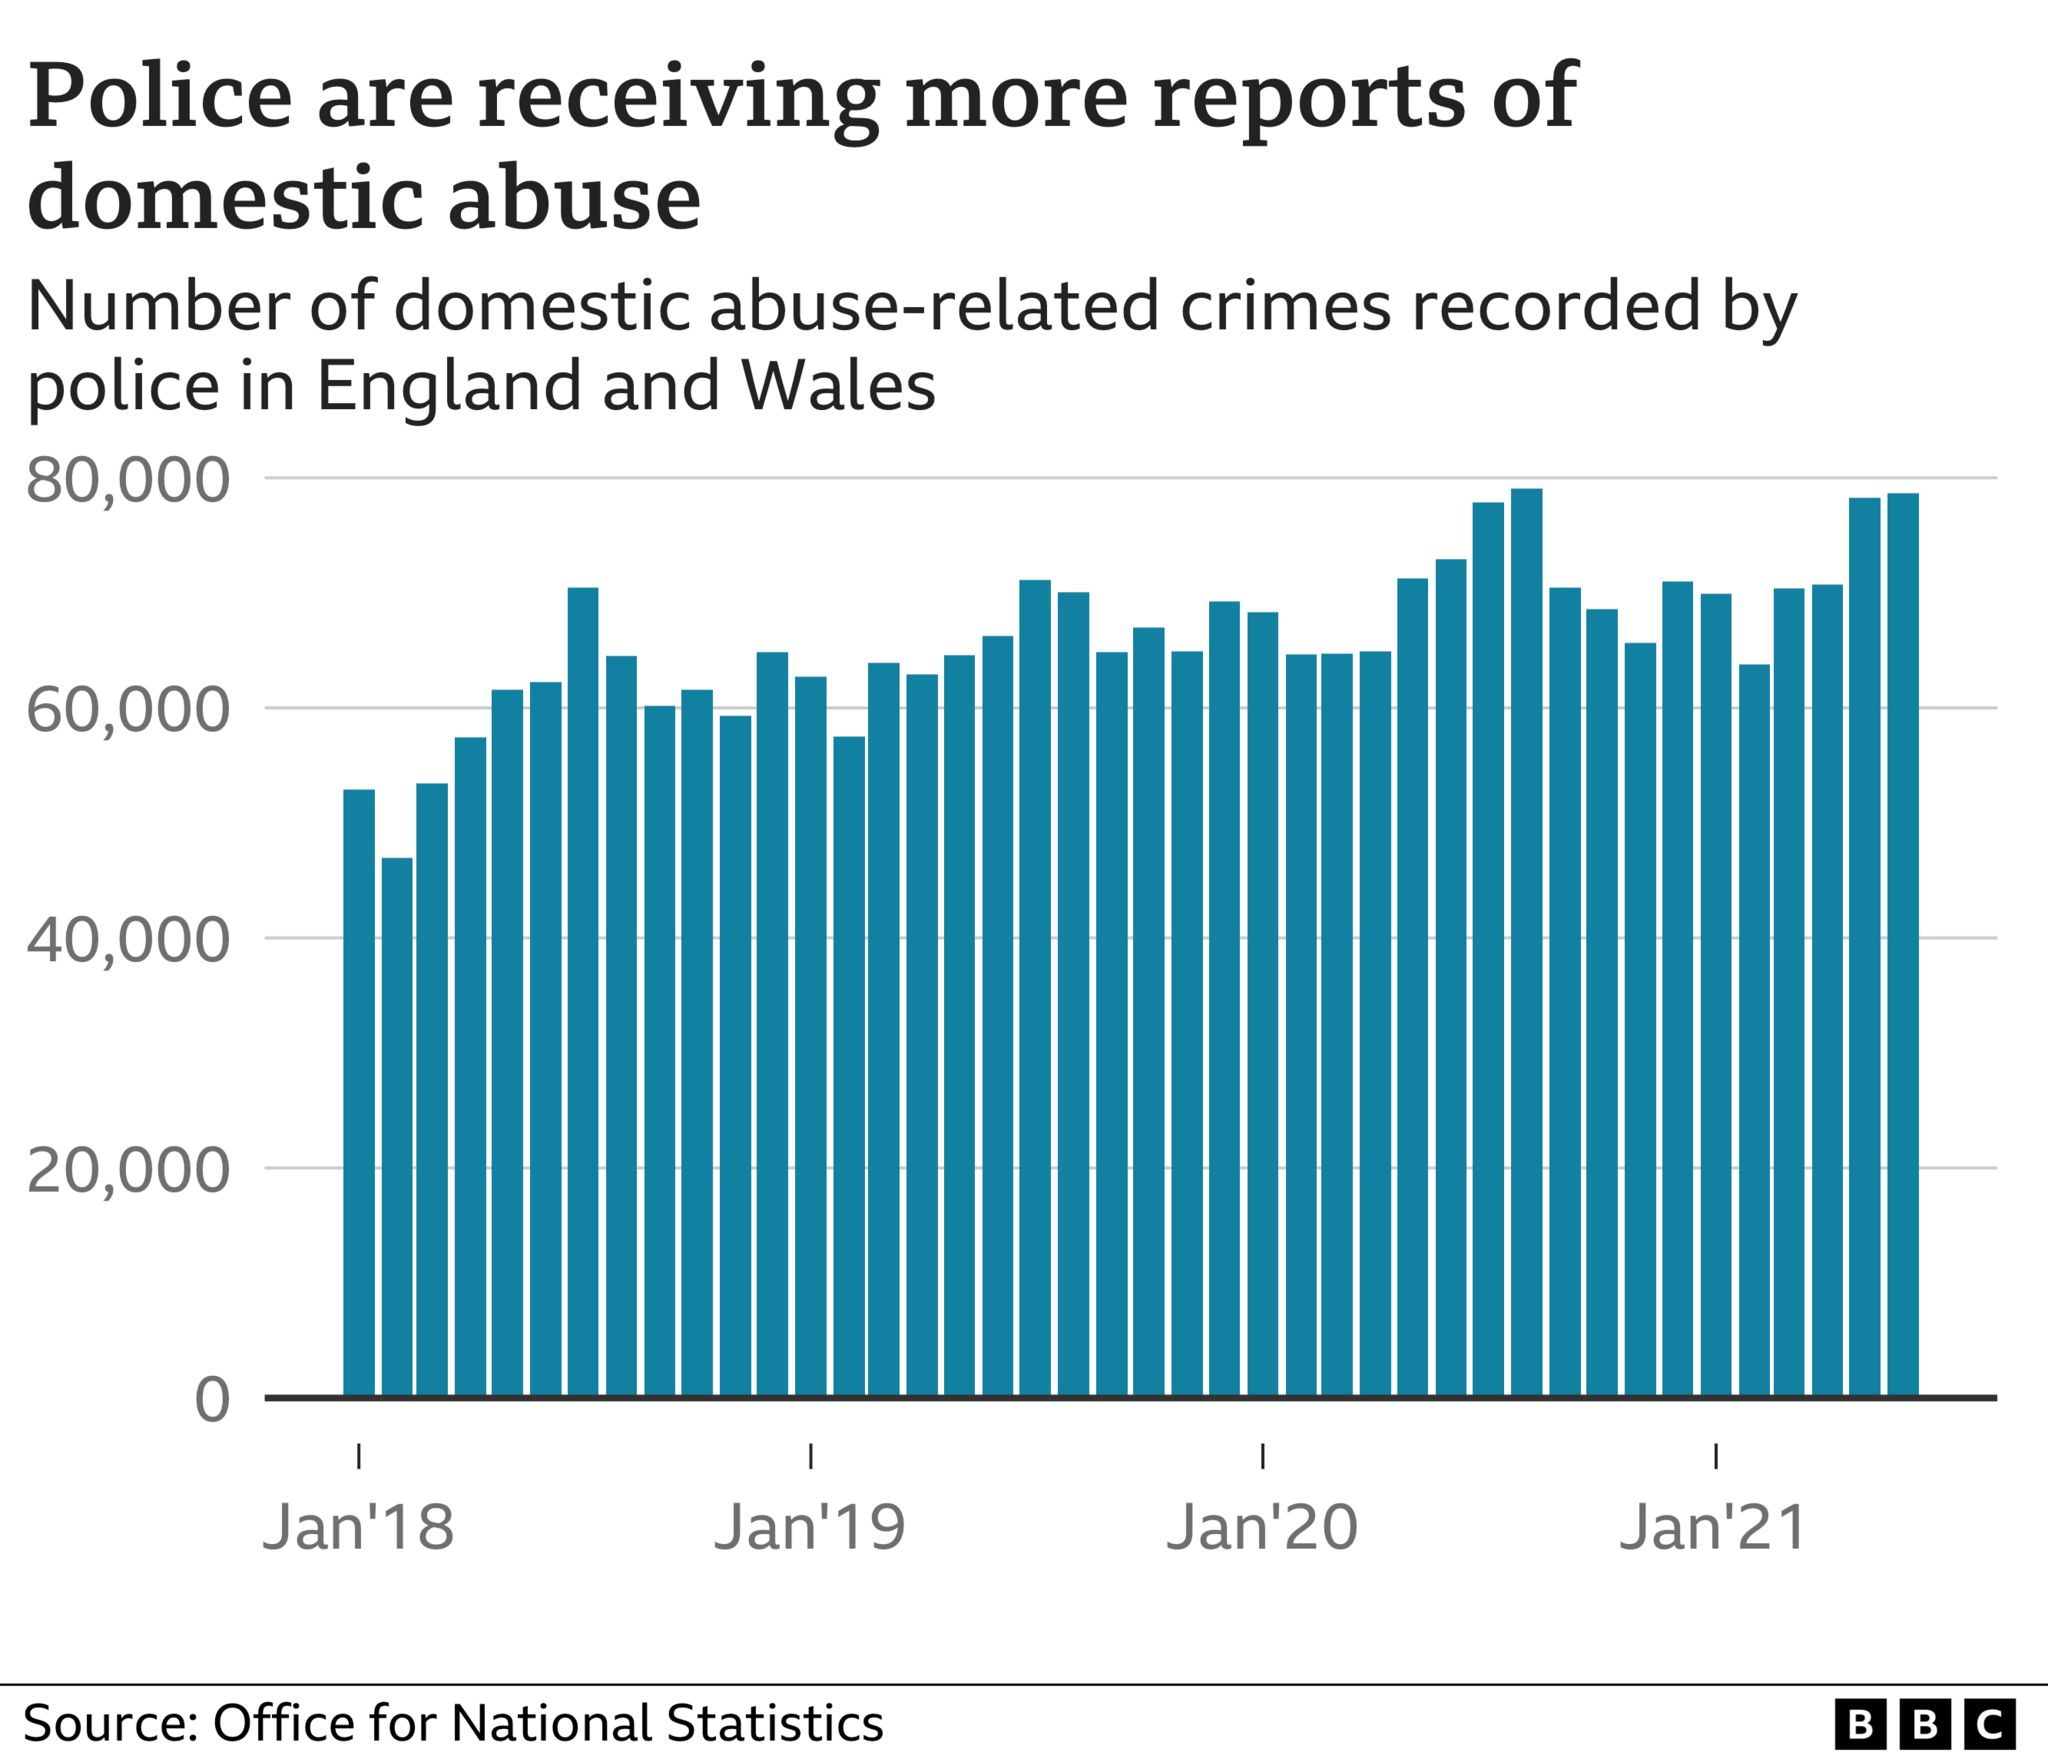 Graph showing the number of domestic abuse crimes recorded by the police in England and Wales since January 2018